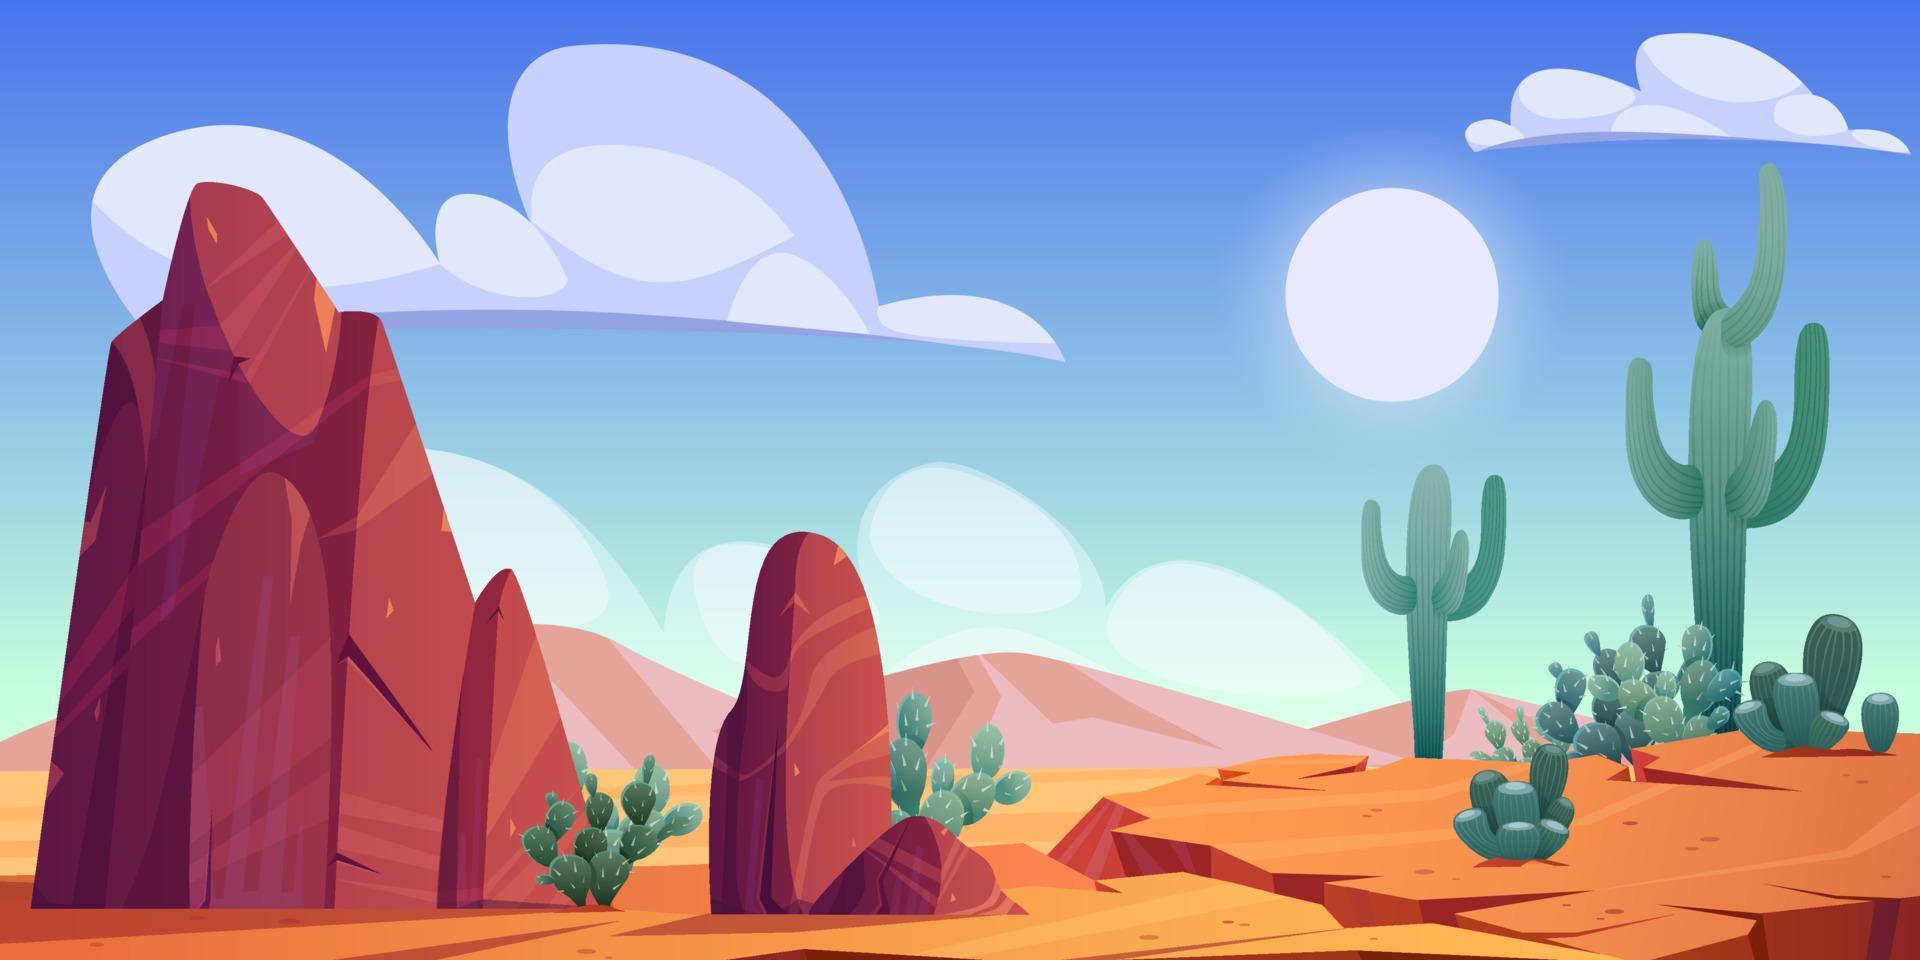 Desert landscape with rocks and cactuses vector